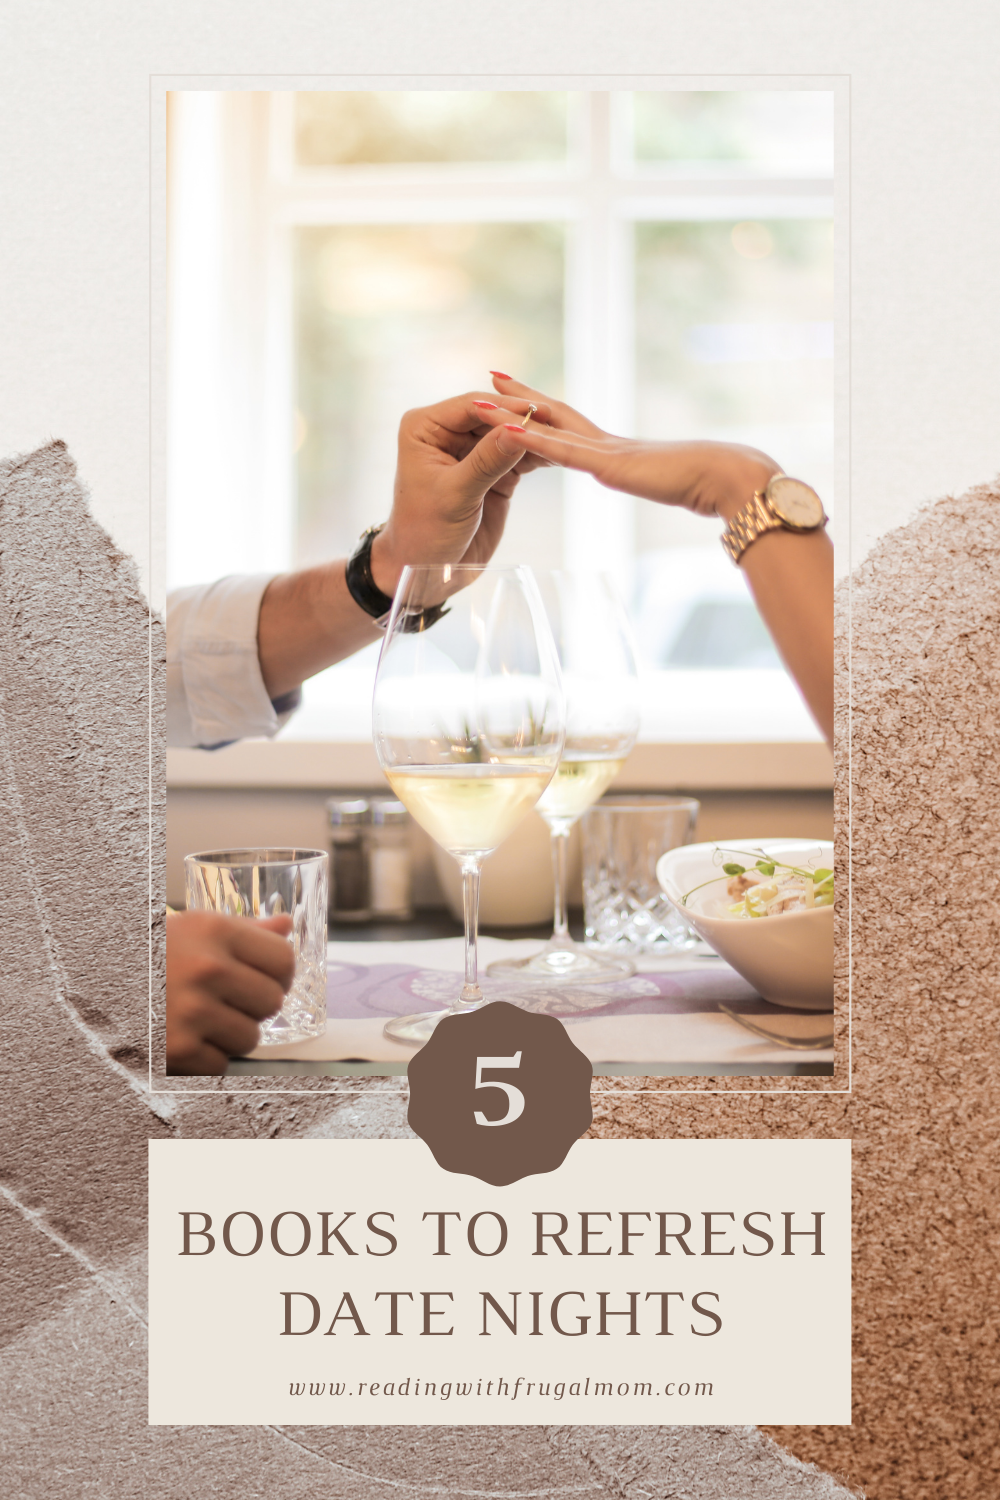 Five Books To Refresh Date Nights from NC Book Blogger Reading with Frugal Mom